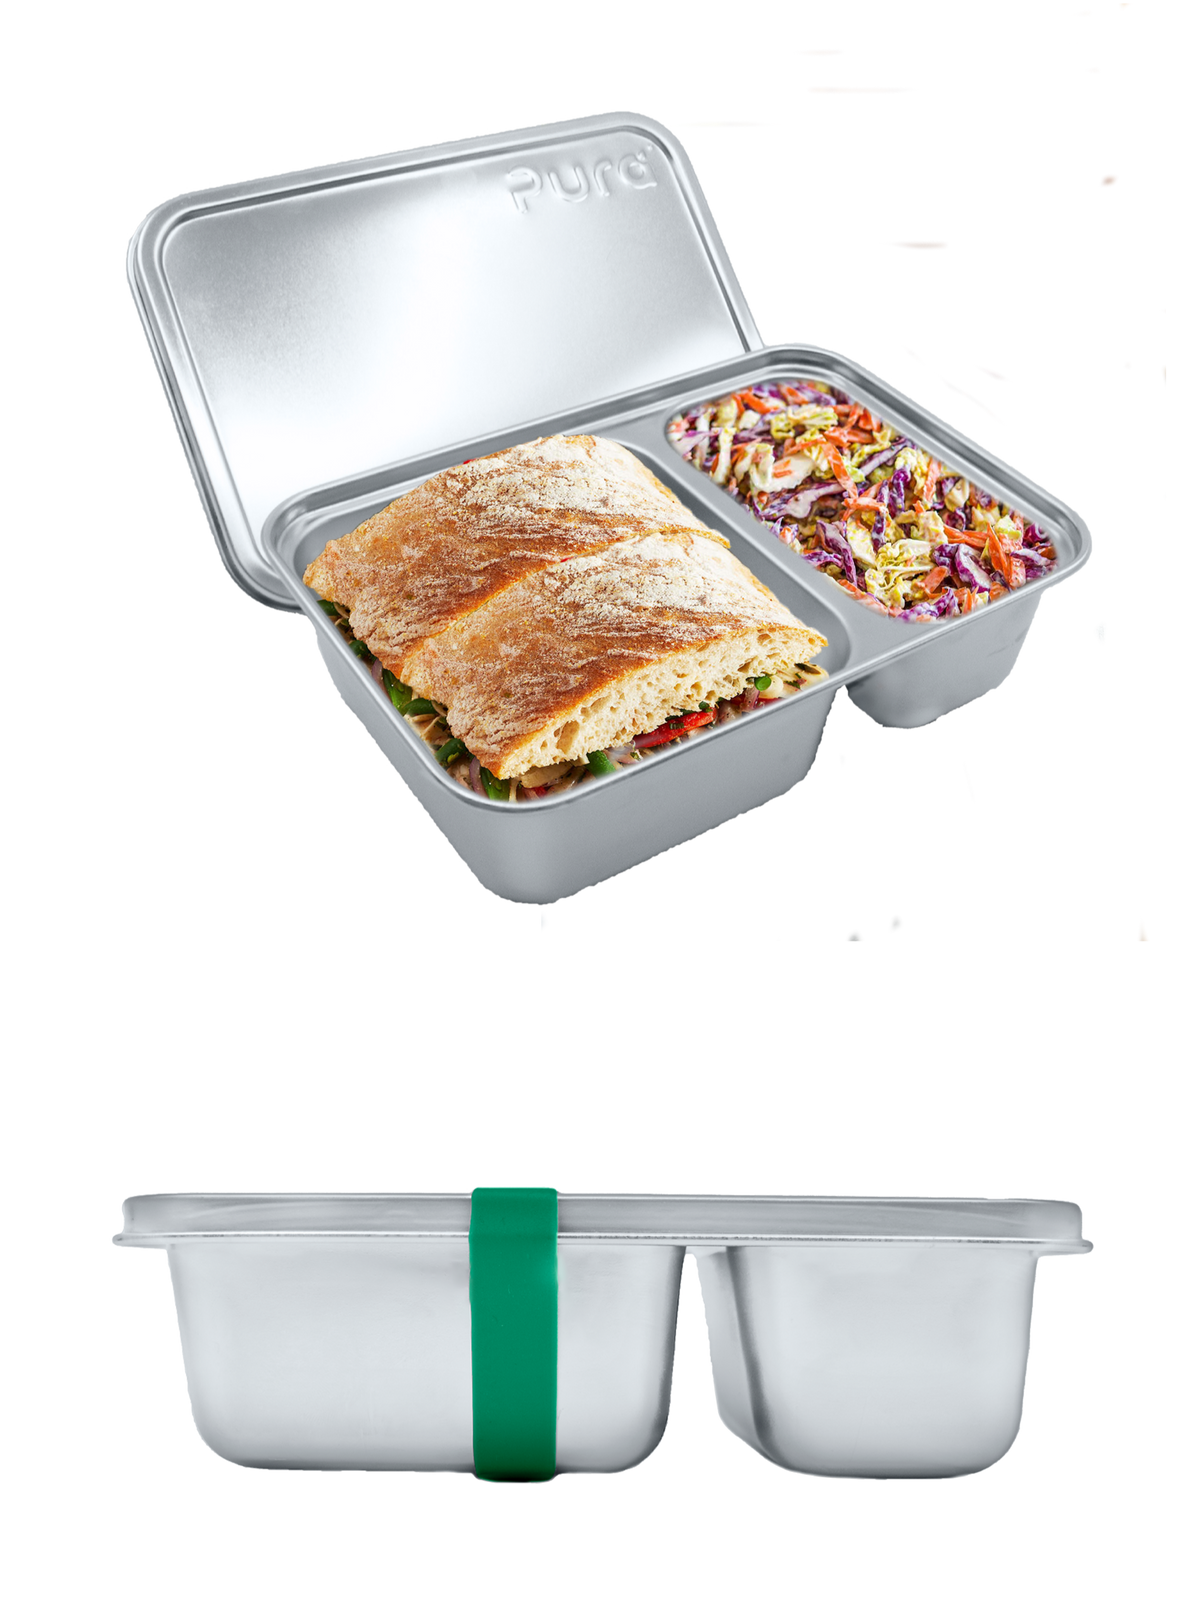 Stainless Steel Lunch Containers, The Safest for your Kids